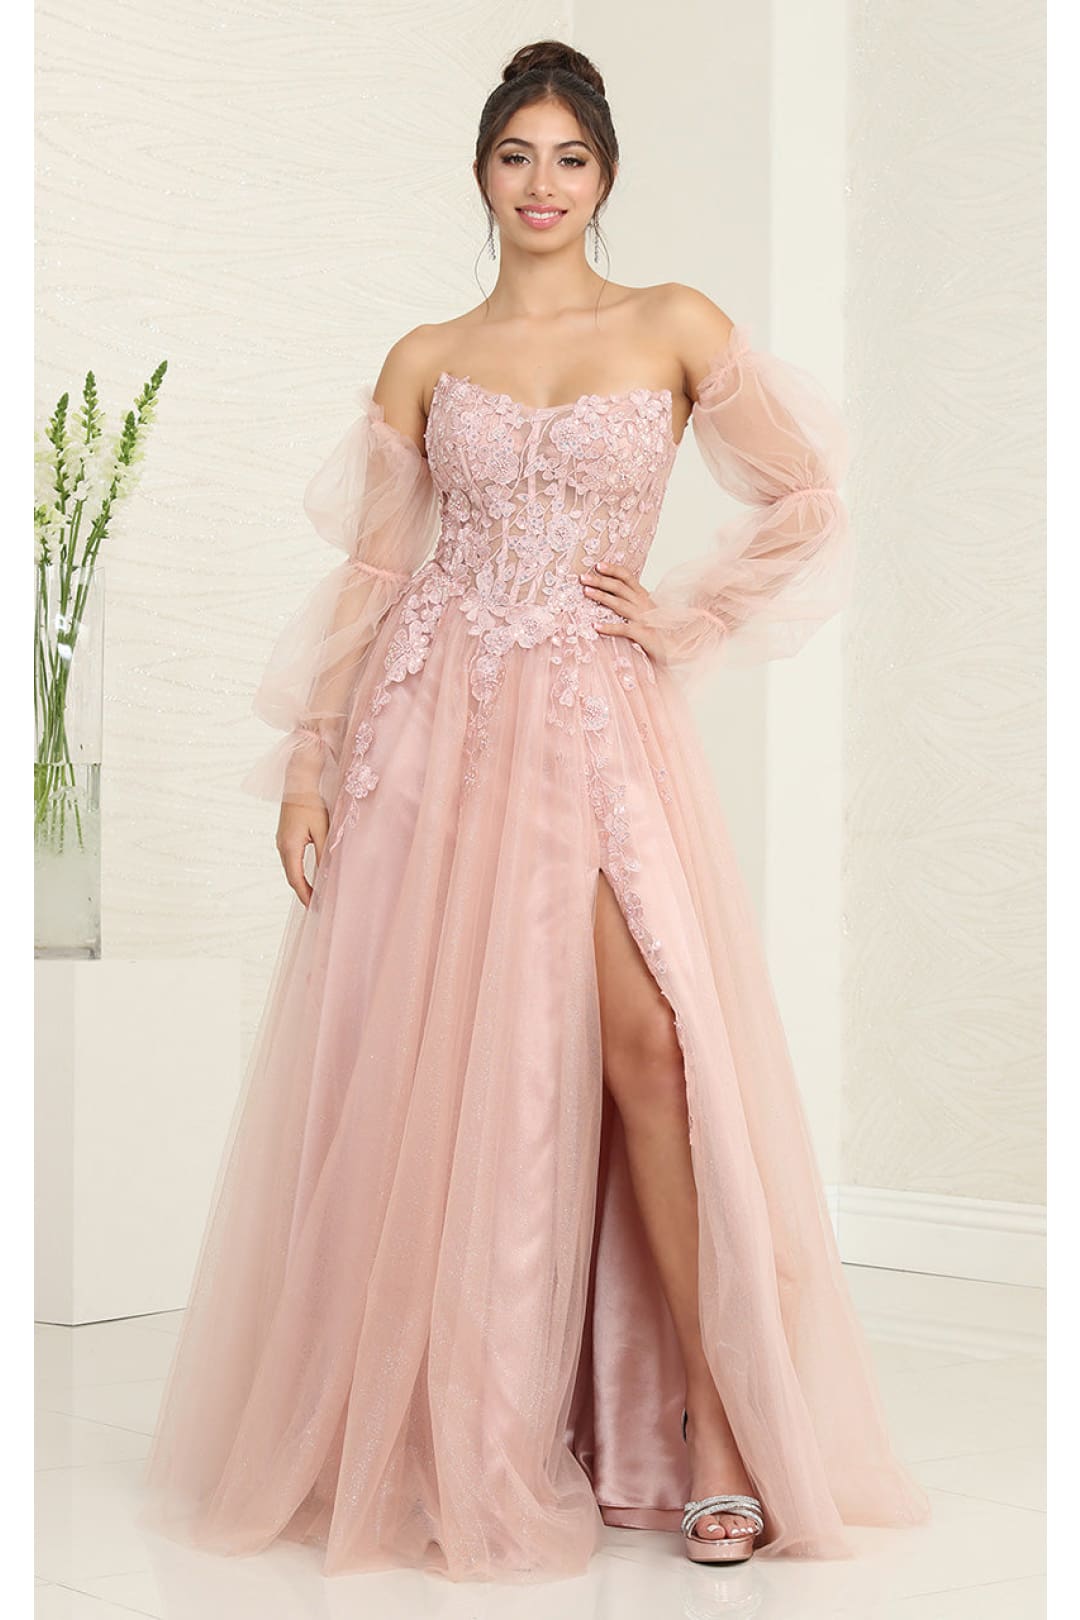 Royal Queen RQ8060 Strapless Puffy Detachable Sleeves A-line Sage Gown - ROSE GOLD / 4 - Dress